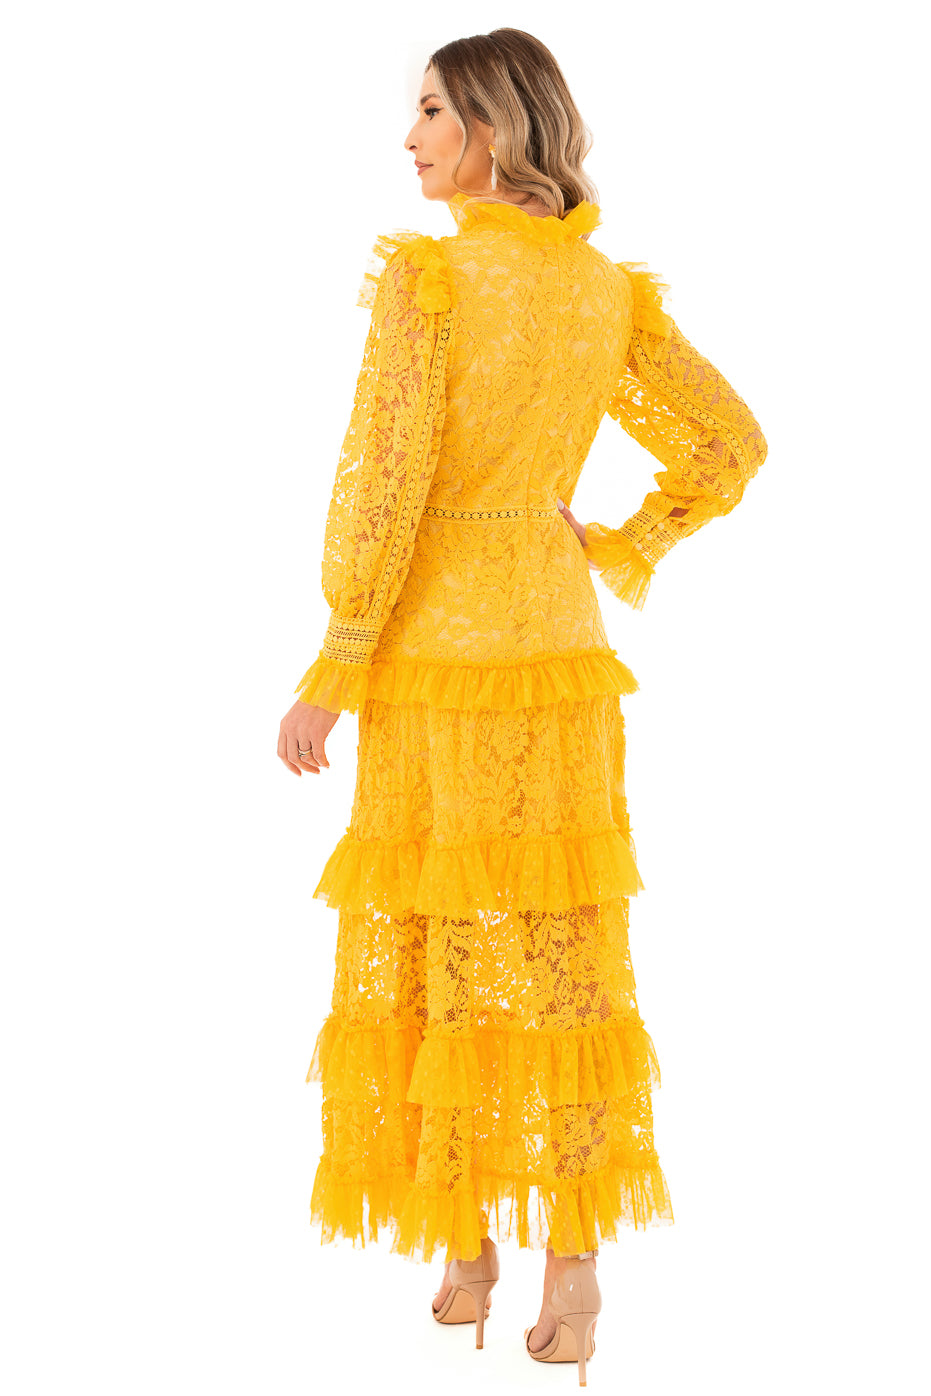 Rochie Lunga din Broderie Galbena - LIMITED EDITION